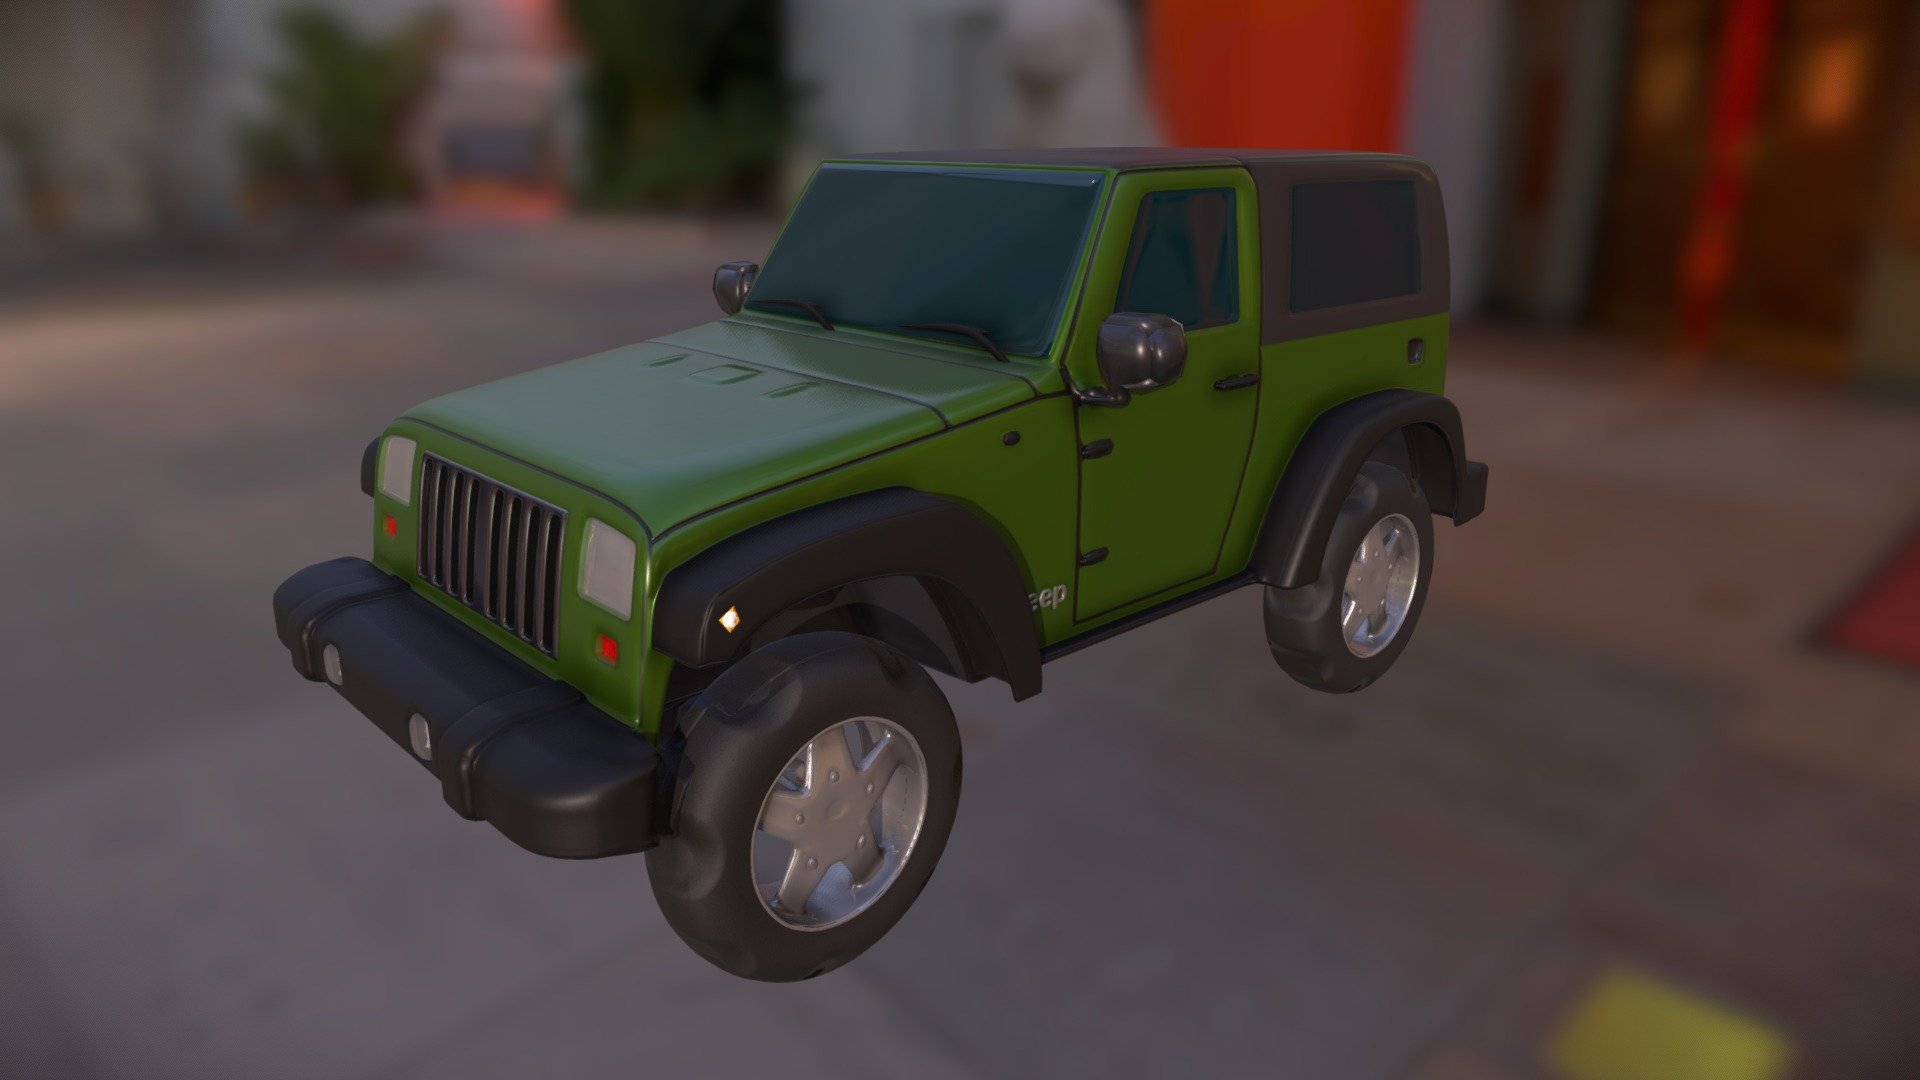 3d model of a Jeep Wrangler made in 3ds Max and textured in Substance Painter 3d model